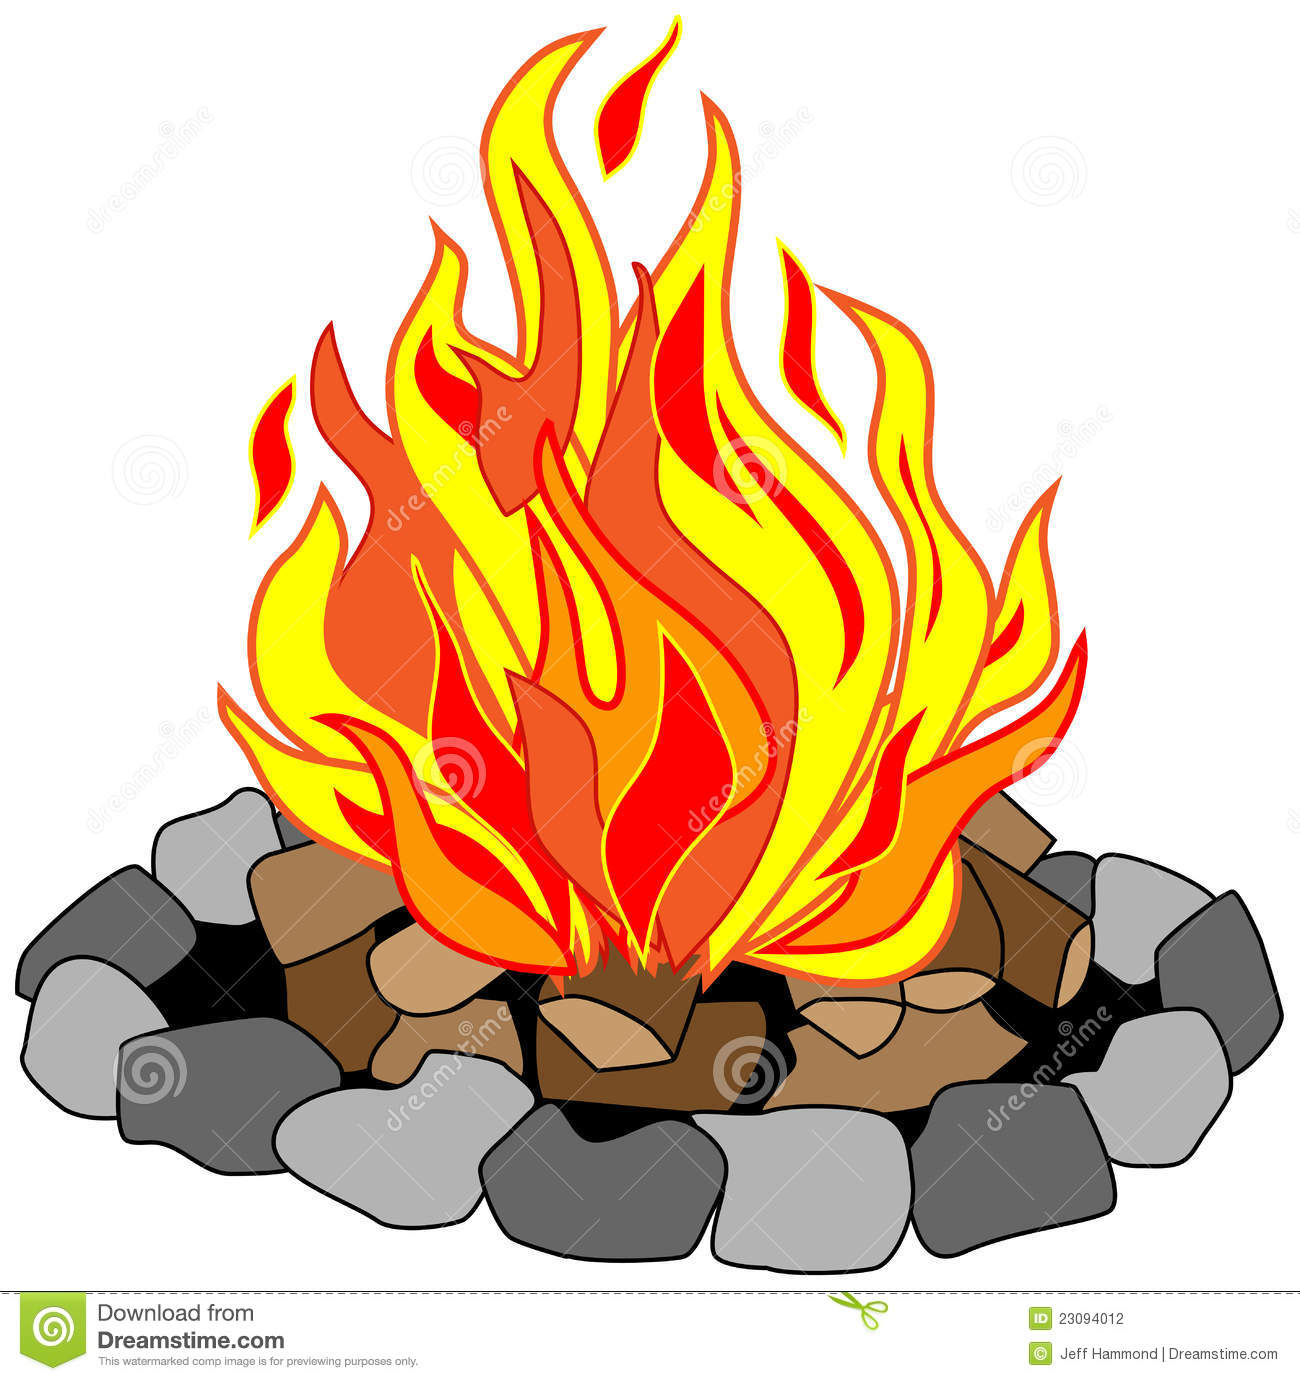 Animated Camp Fire Clipart